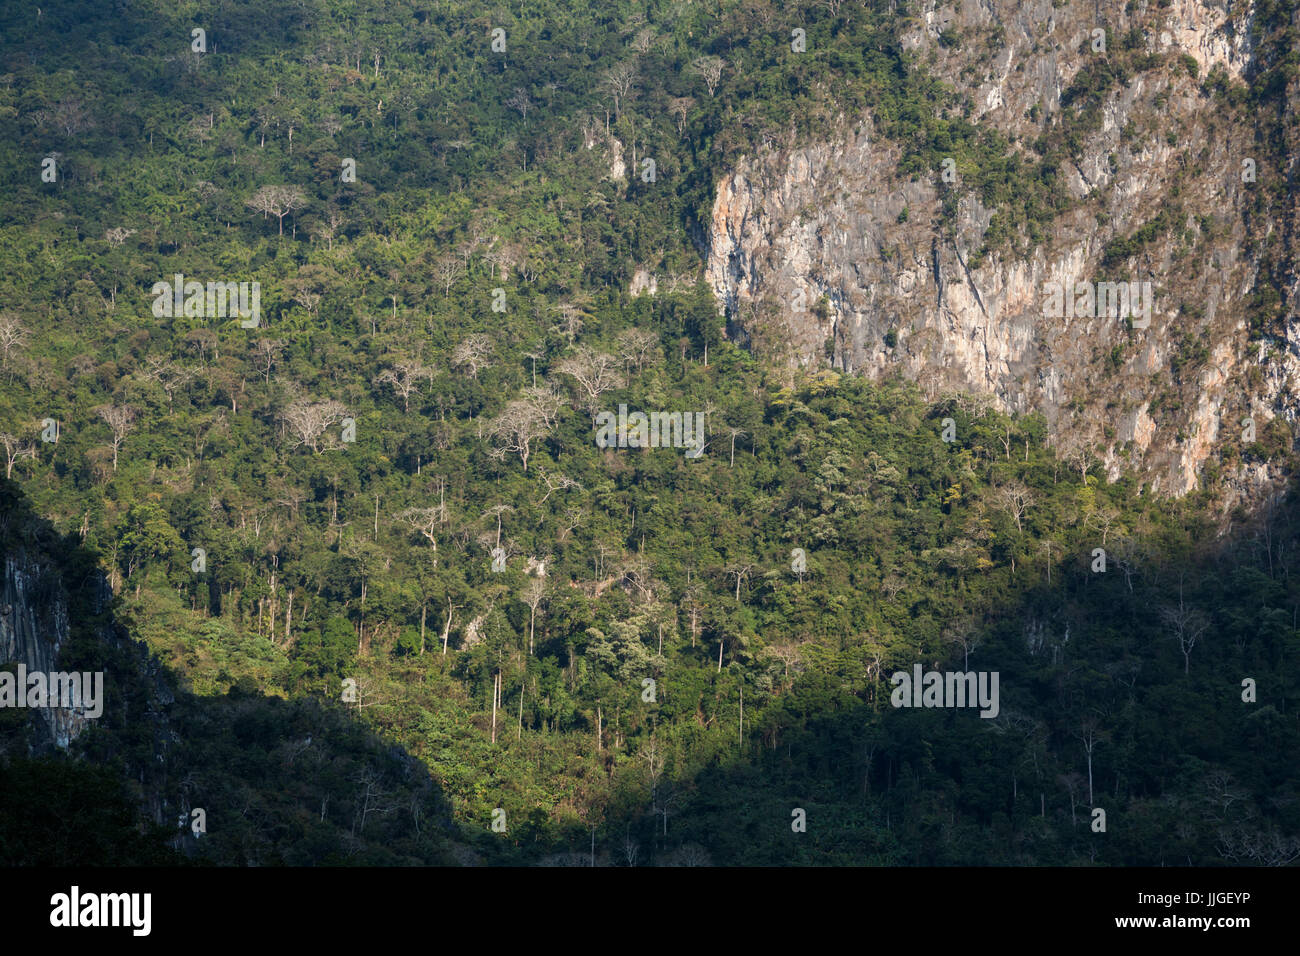 Steep limestone cliffs and forested slopes above the Nam Ou River near Muang Ngoi, Laos. Stock Photo